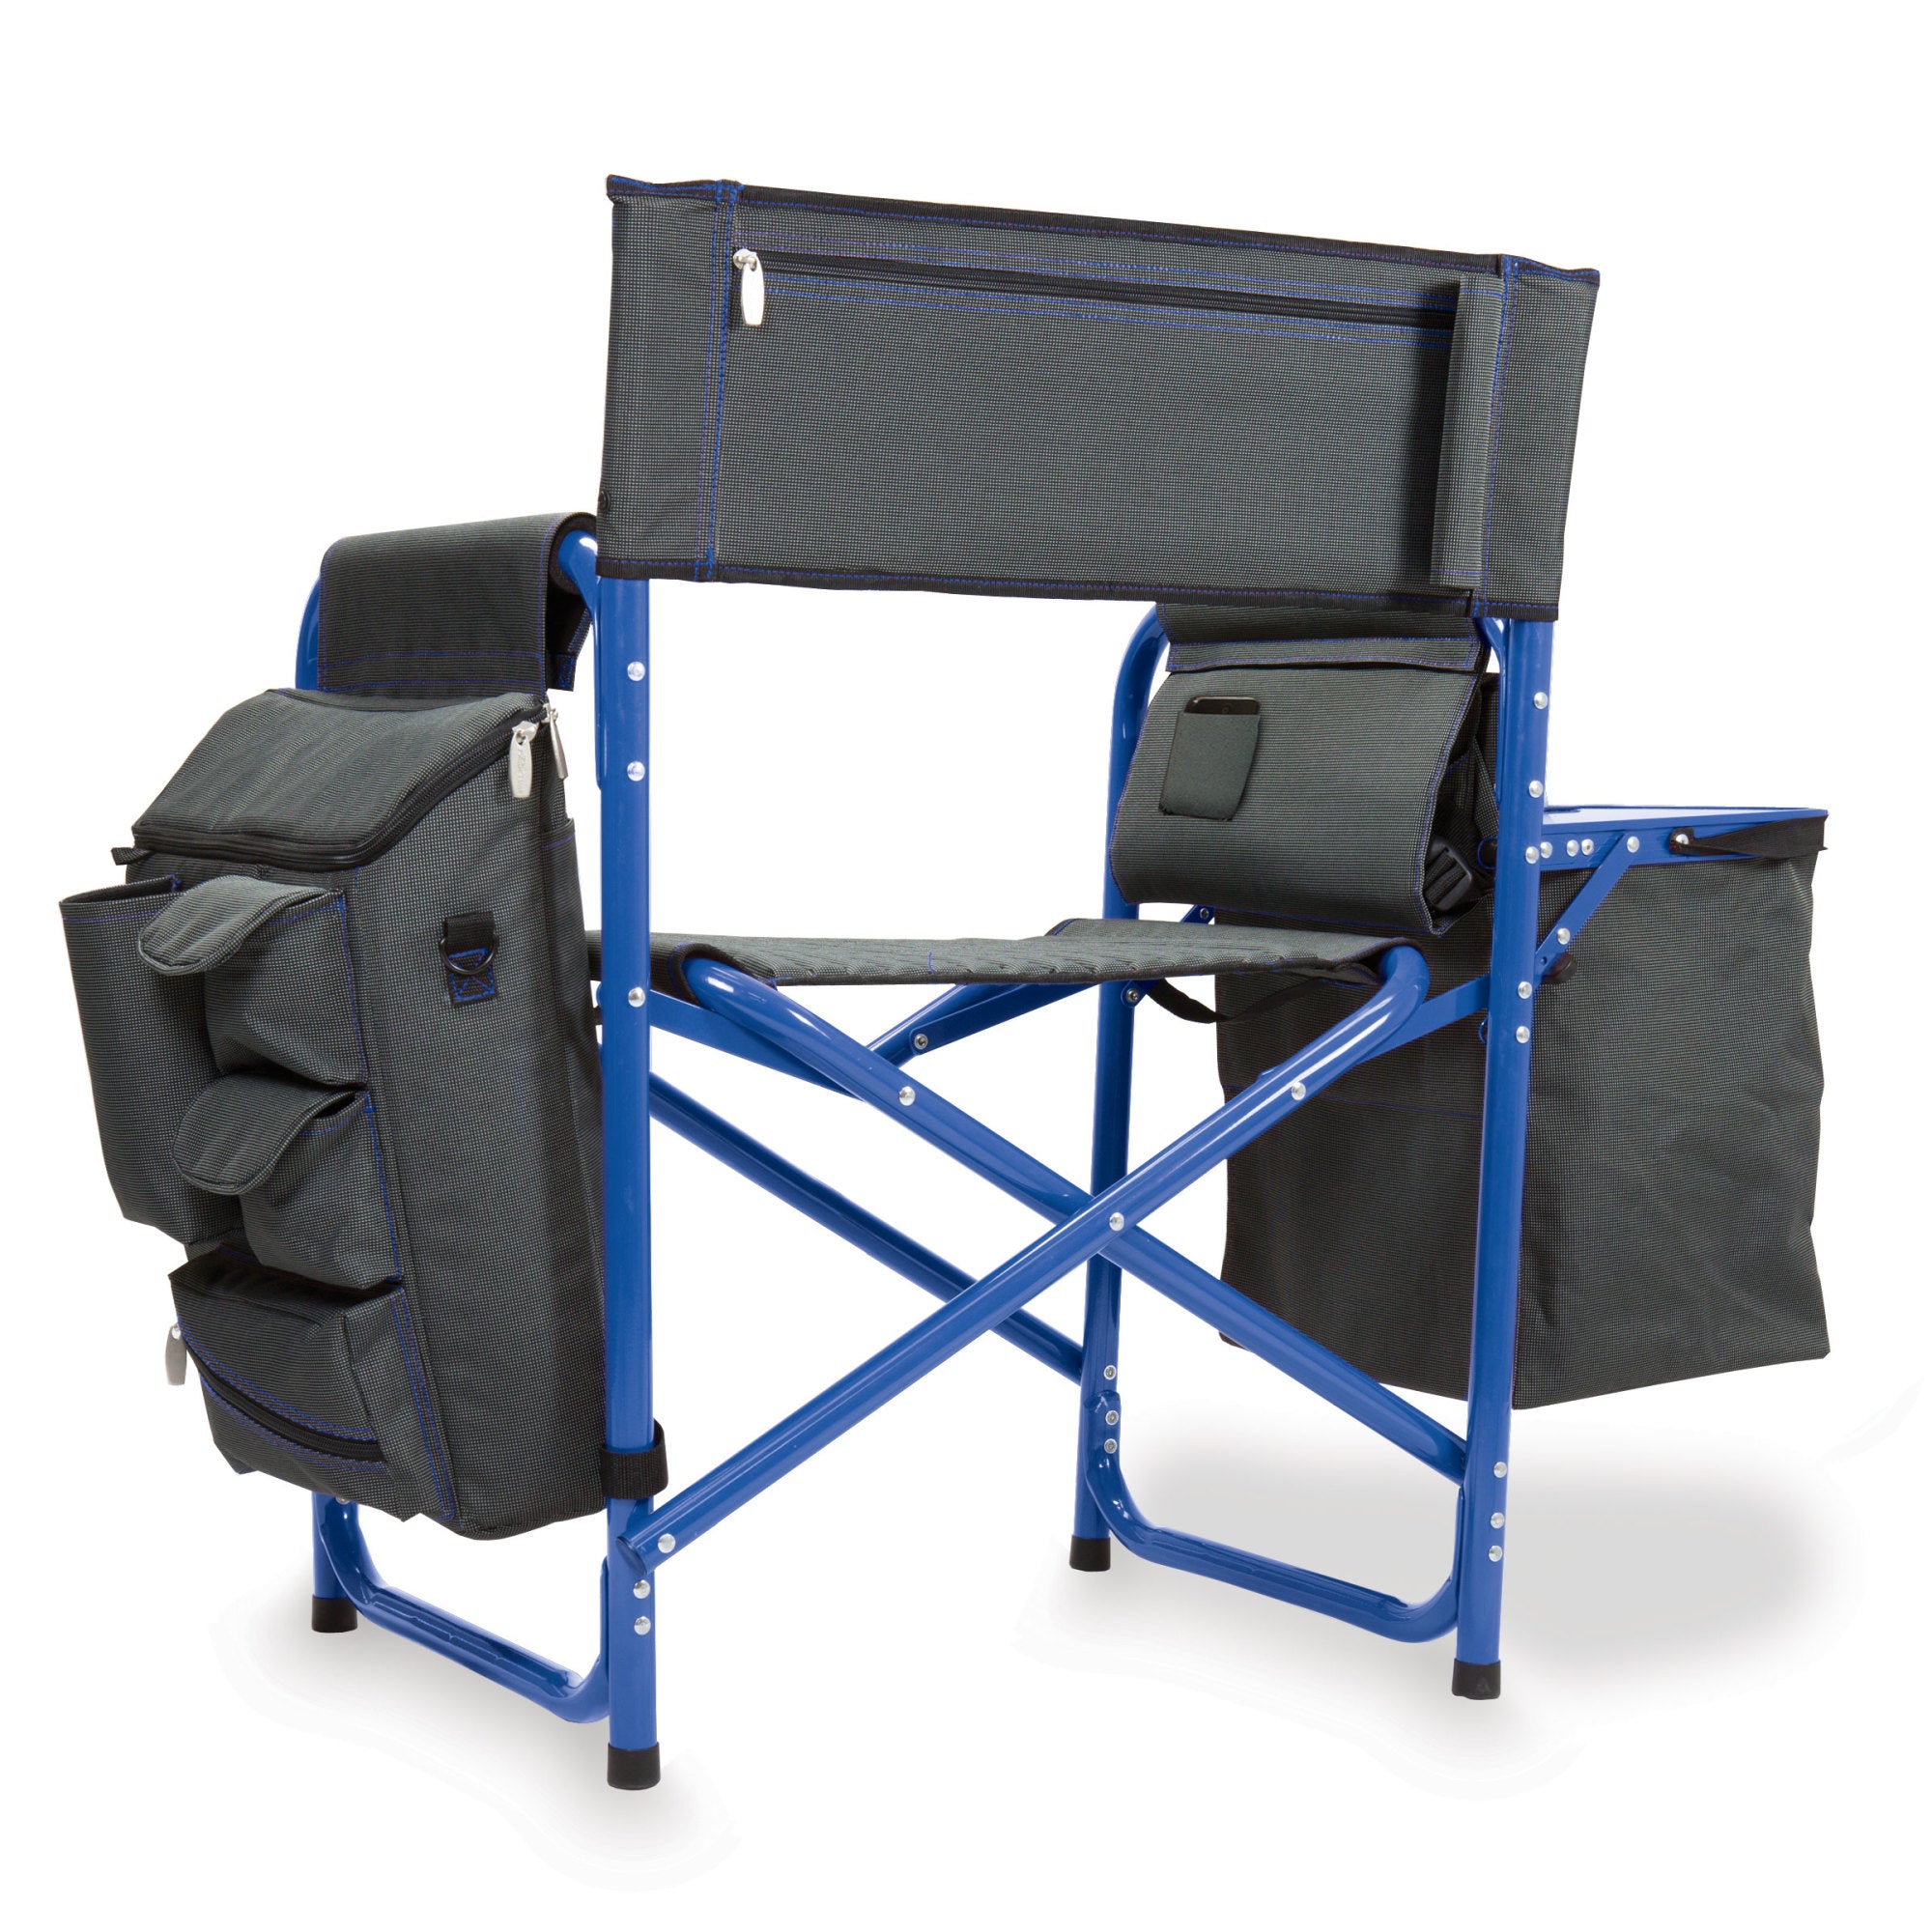 Seattle Mariners - Fusion Camping Chair